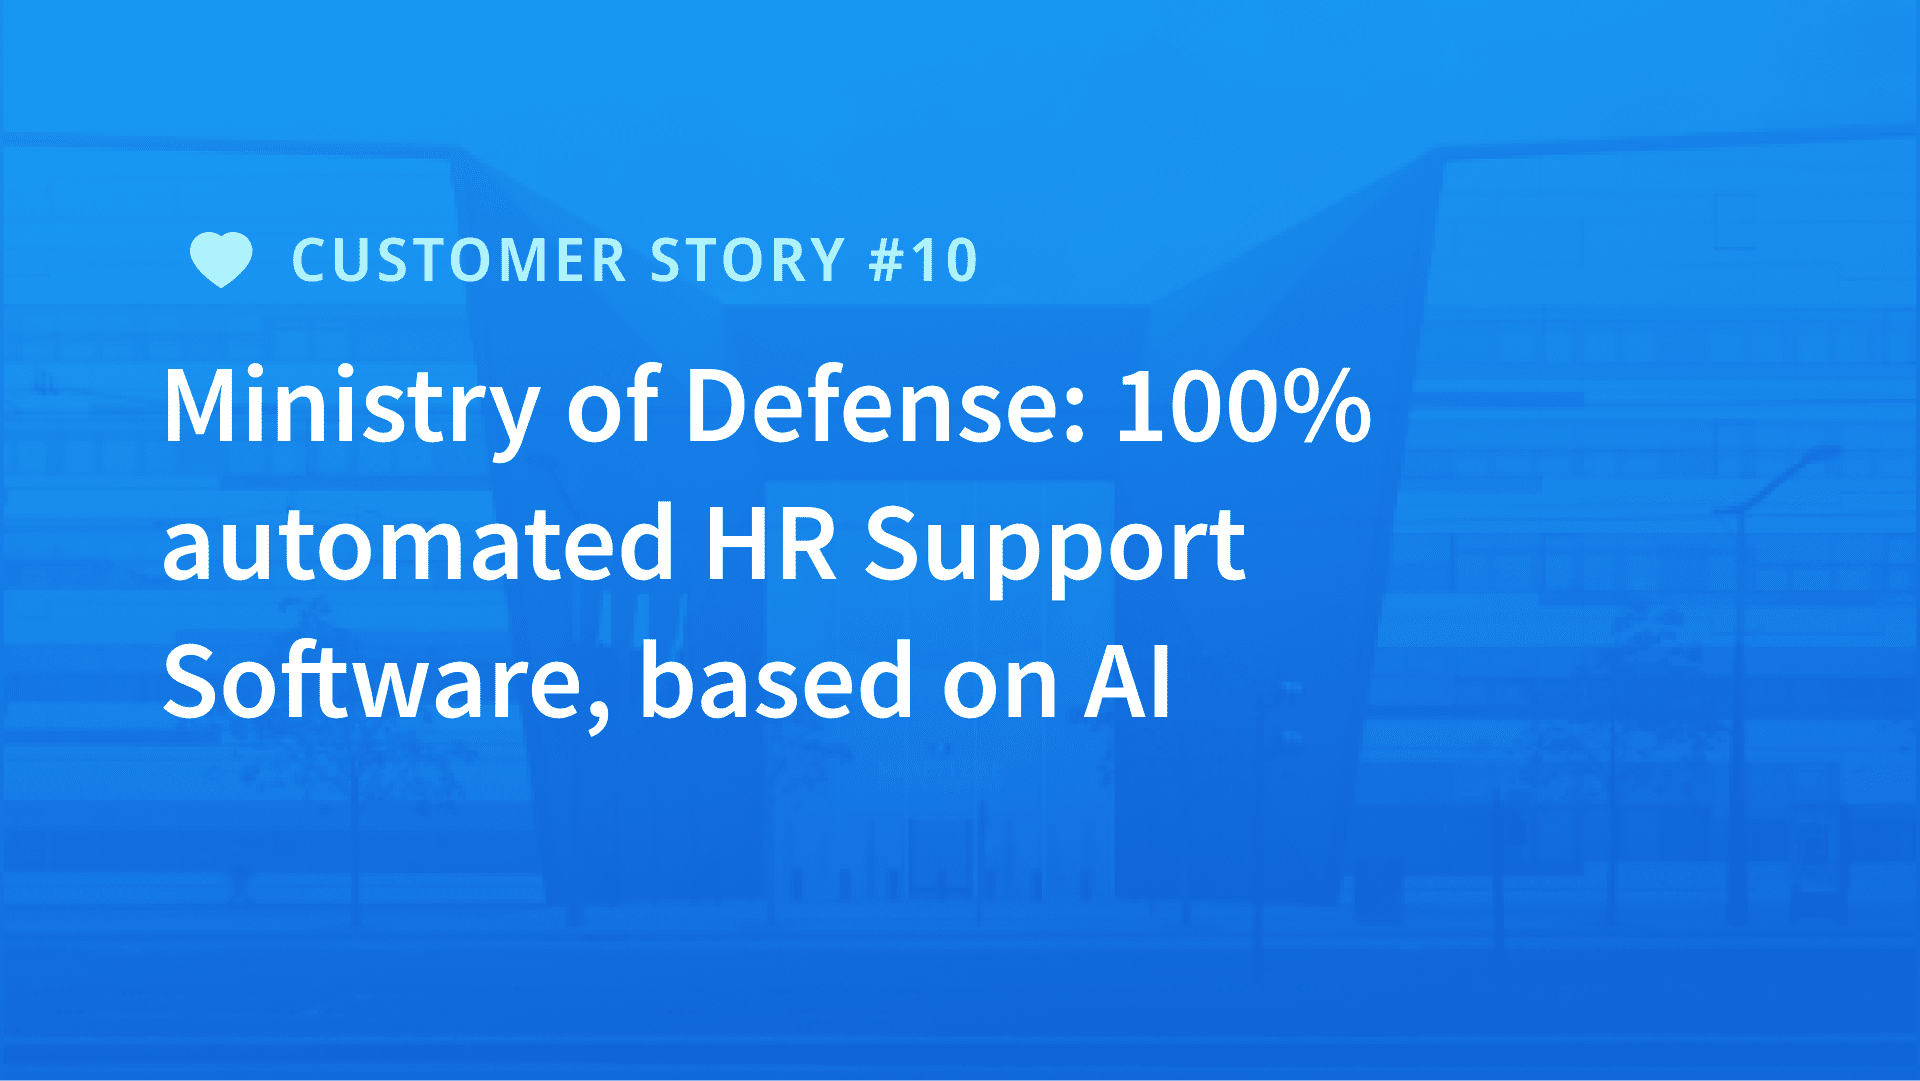 Ministry of Defense: 100% automated HR Support Software, based on AI